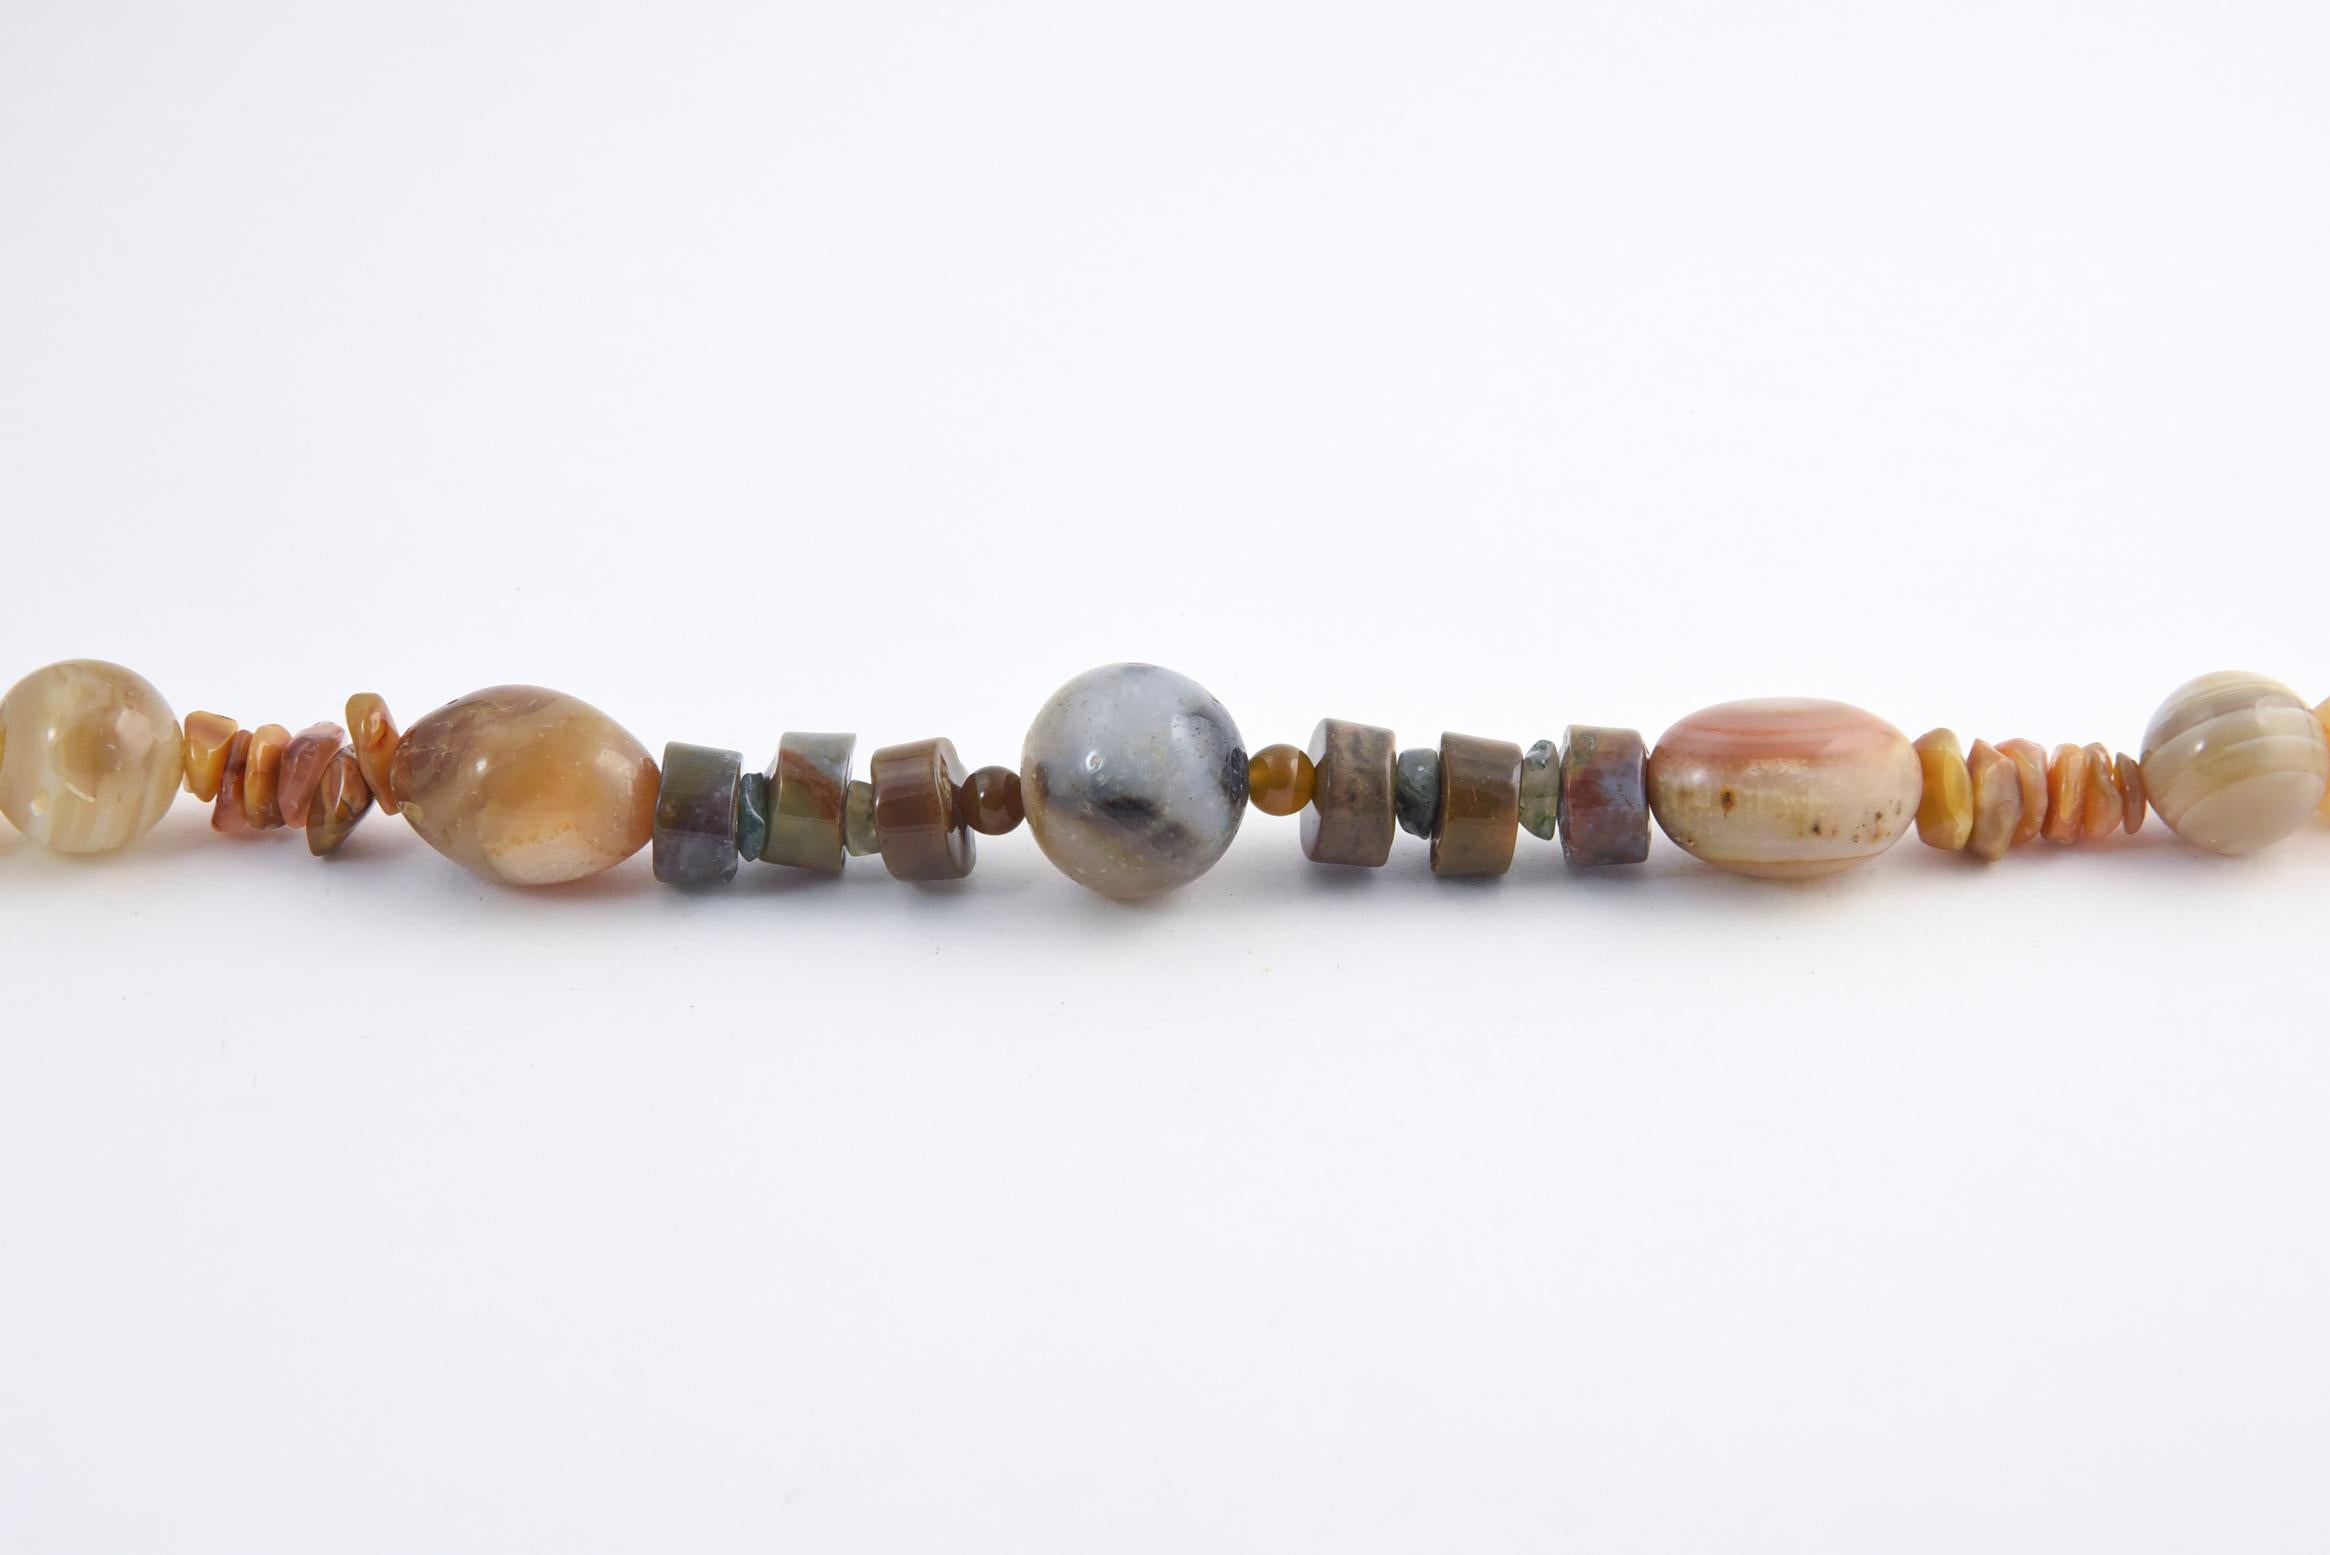 Multicolored Agate and Amethyst Bead Necklace For Sale 4